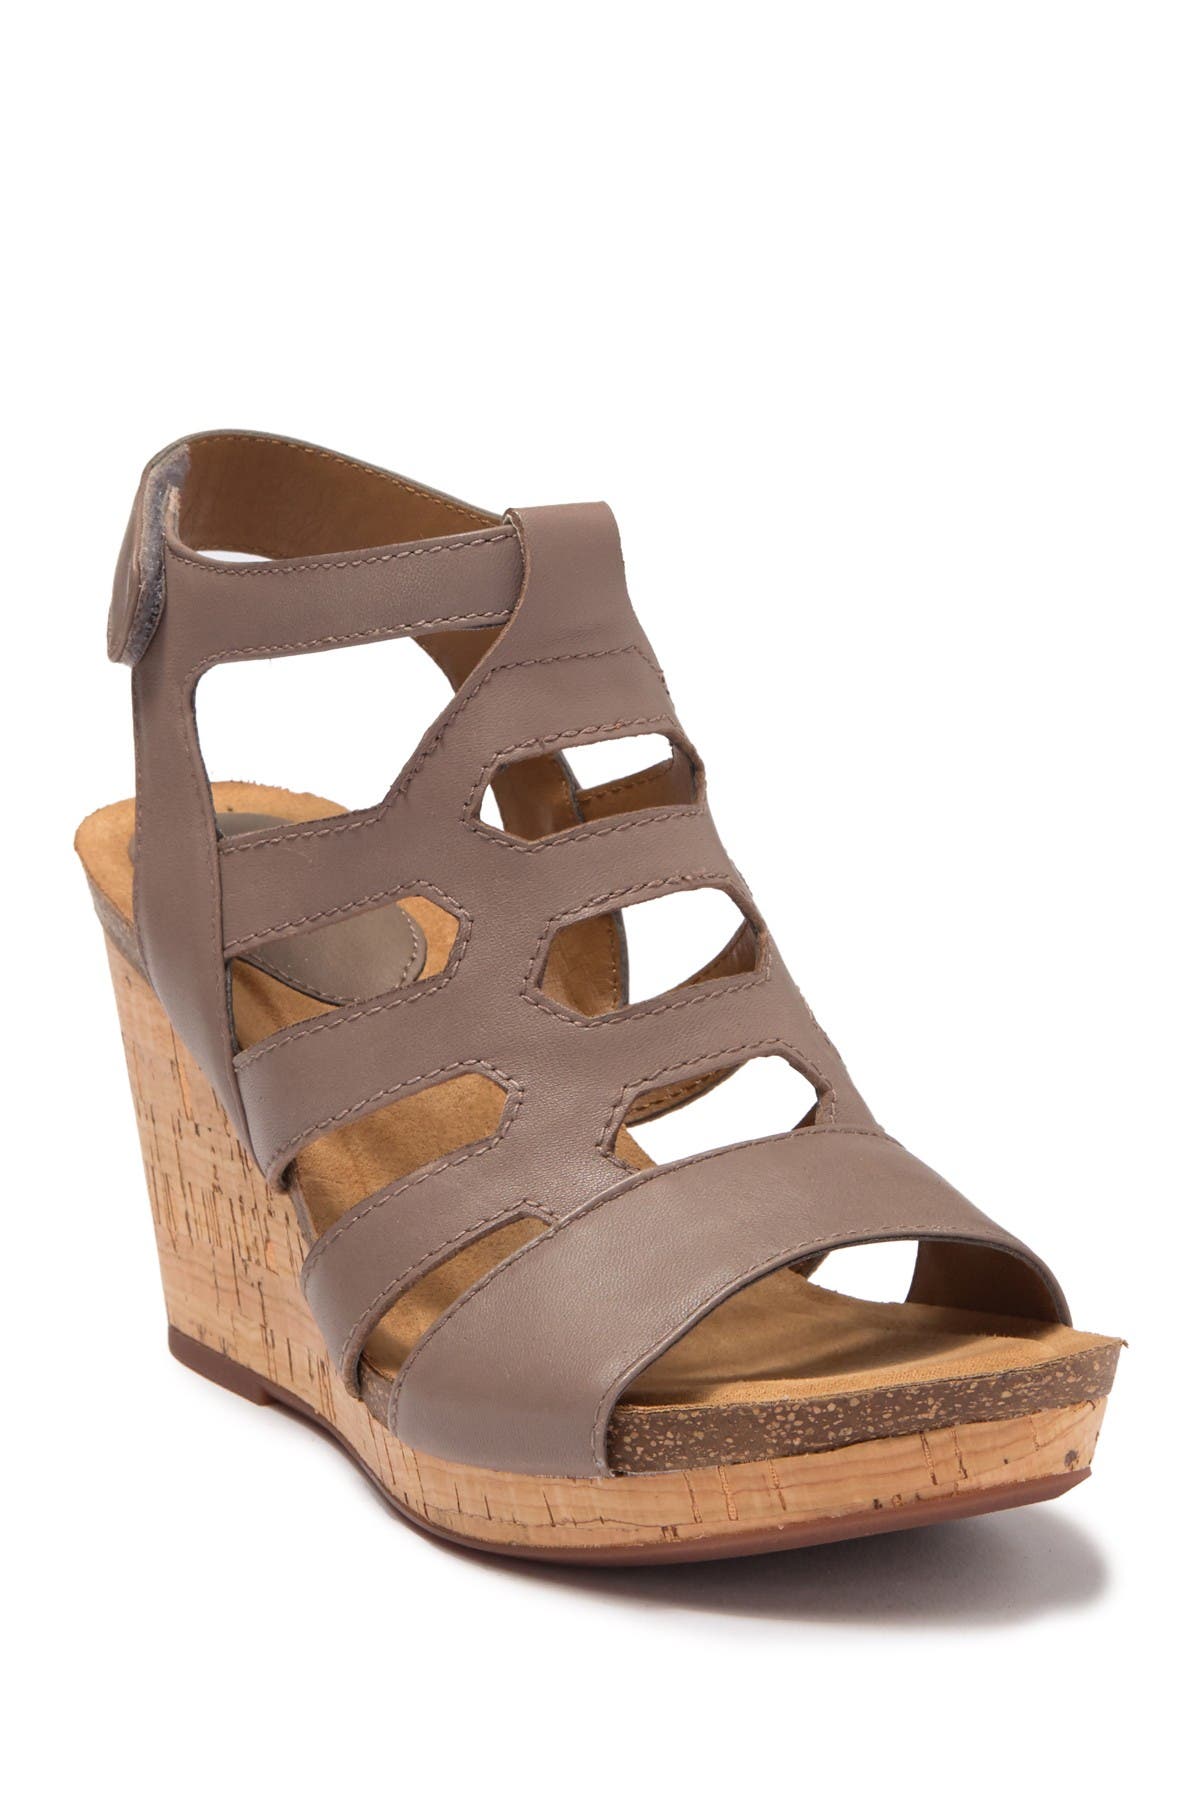 Sofft | Chamblee Leather Wedge Sandal 